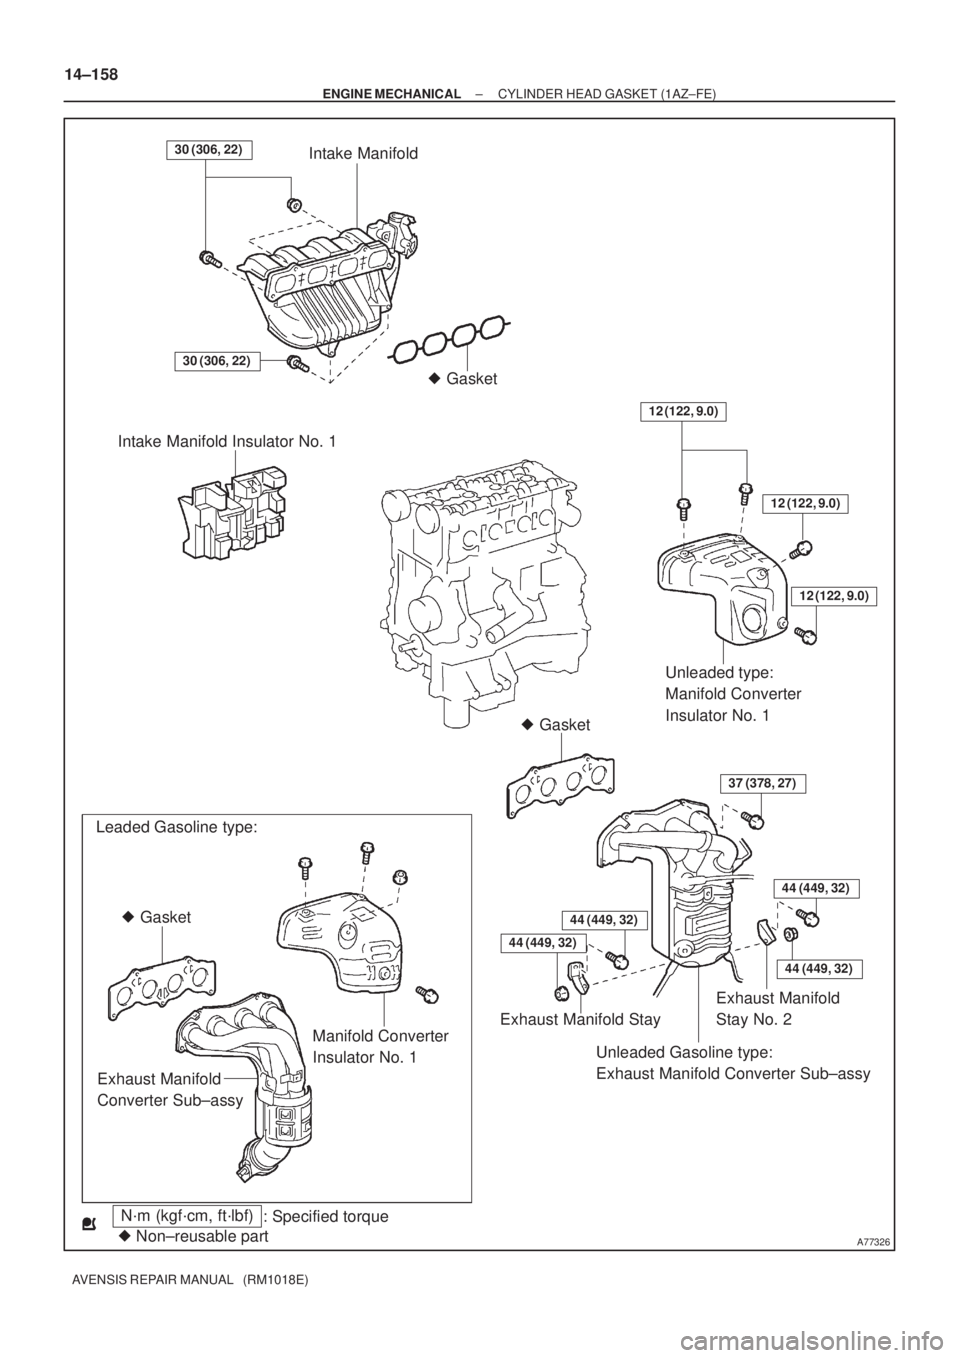 TOYOTA AVENSIS 2005  Service Repair Manual A77326
Intake Manifold
N´m (kgf´cm, ft´lbf)
: Specified torque
 Non±reusable part
30 (306, 22)
 Gasket
30 (306, 22)
Intake Manifold Insulator No. 1
12 (122, 9.0)
Unleaded type: 
Manifold Convert